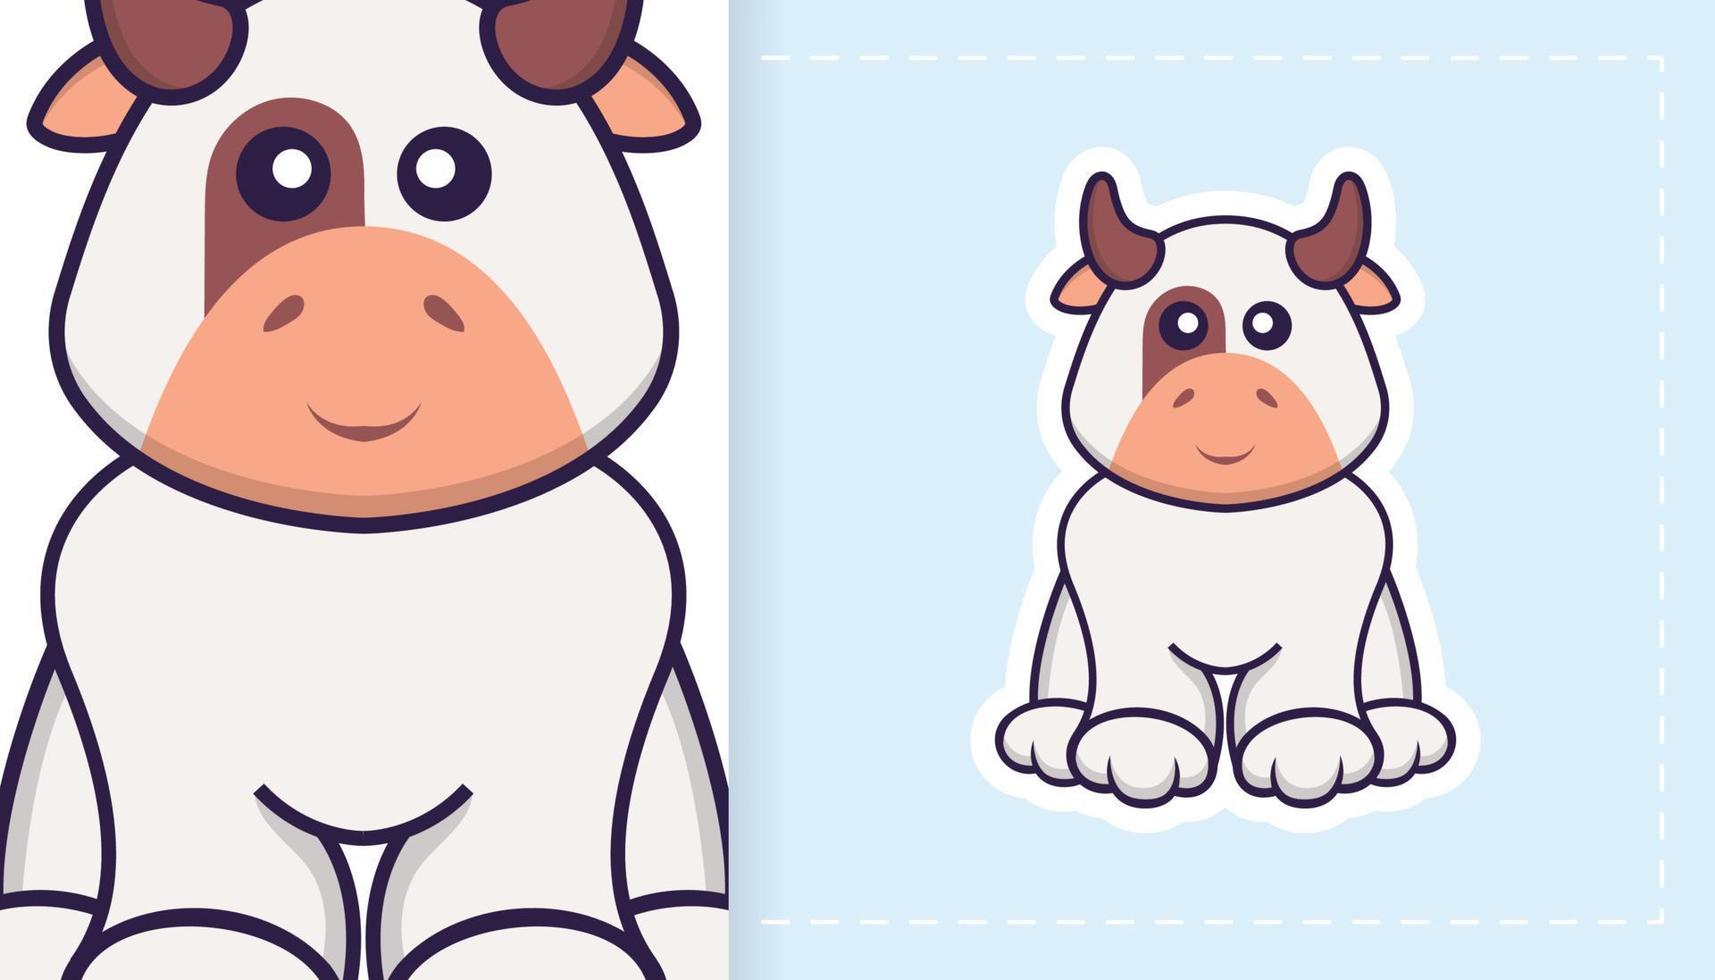 Cute cow mascot character. Can be used for stickers, patches, textiles, paper. Vector illustration